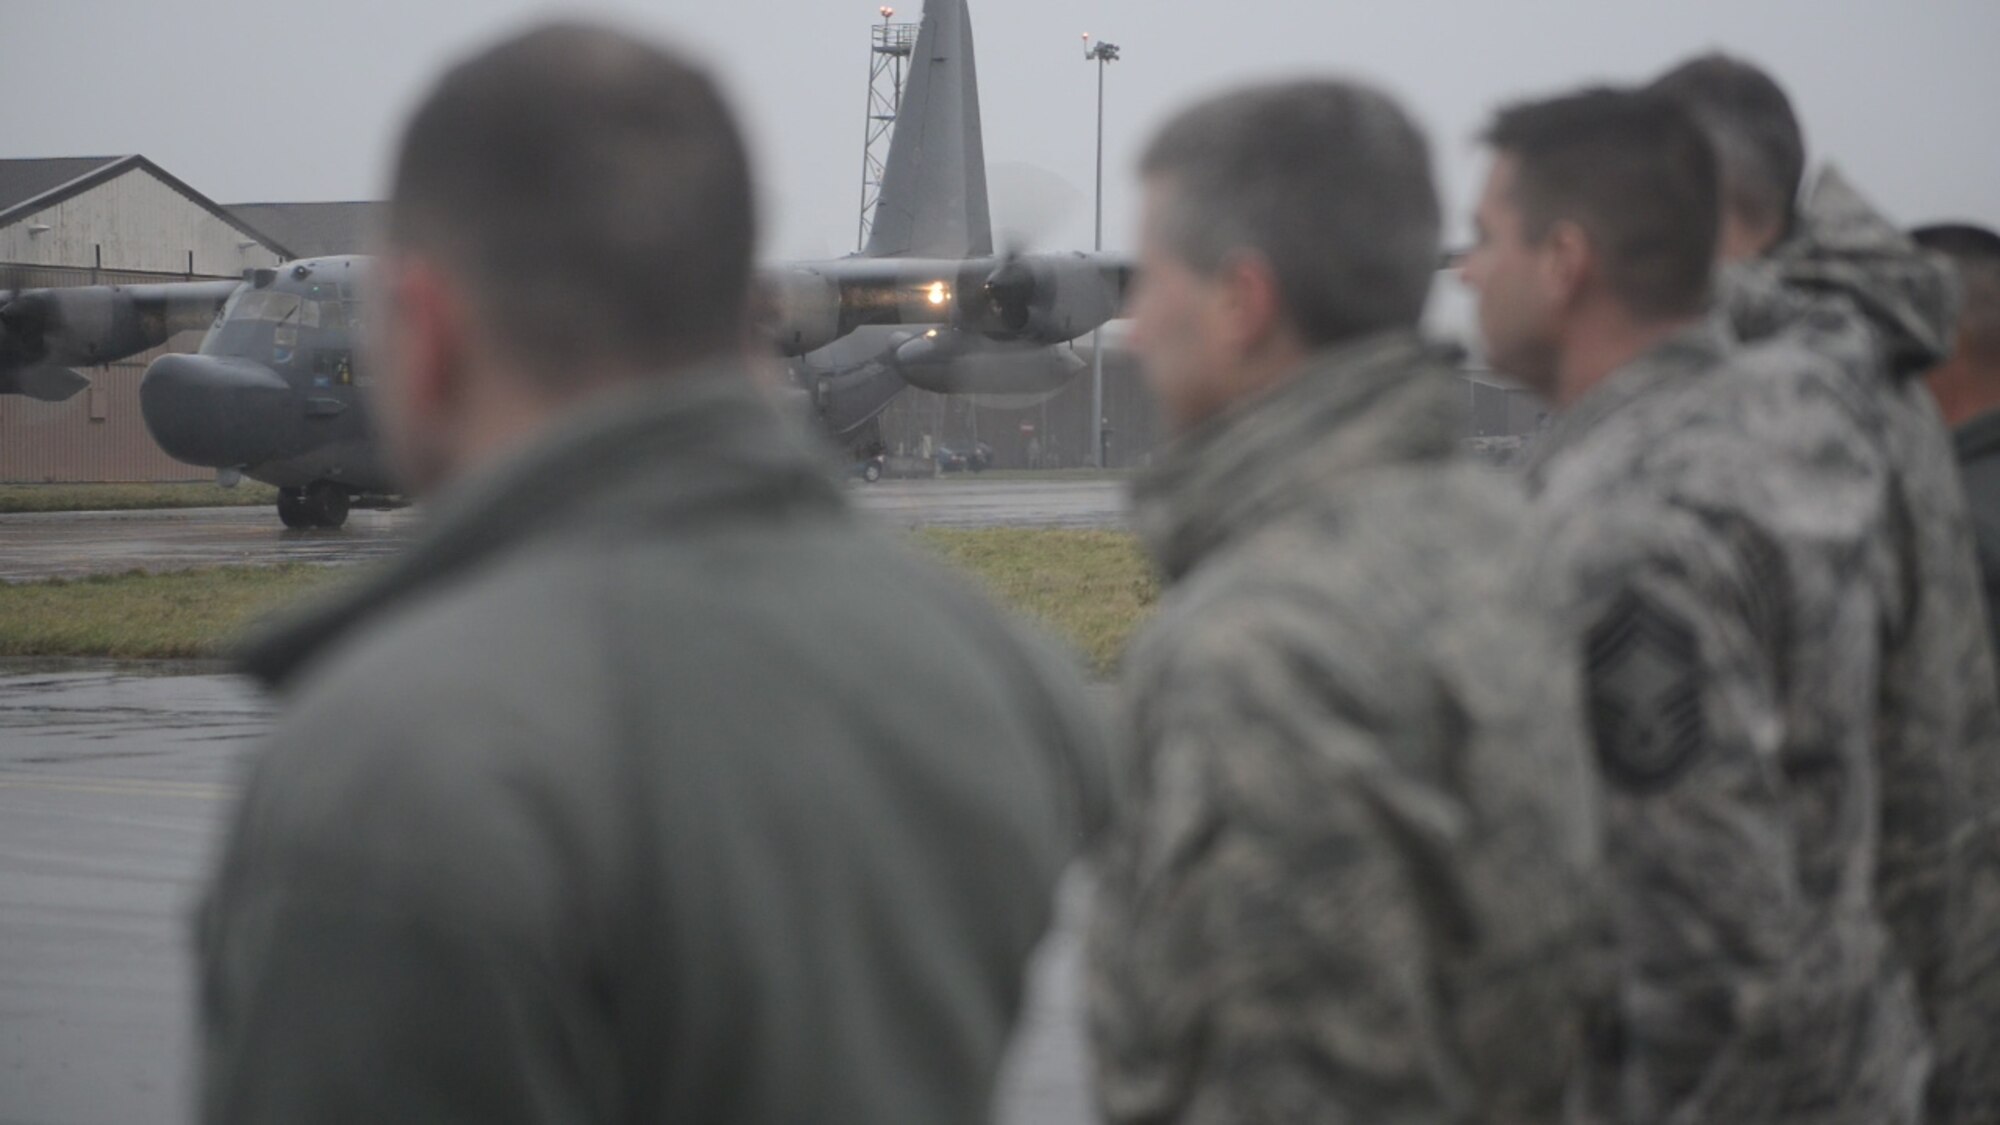 Airmen from the 352nd Special Operations Group and the 100th Air Refueling Wing line Delta Row taxiway Jan. 8, 2015, render a final salute as the MC-130H Combat Talon II departs RAF Mildenhall for Hurlburt Field, Florida. This departure flight concludes its tenure at the 7th Special Operations Squadron at RAF Mildenhall. The MC-130H, tail number 0195, is the last of its kind to leave the European theater. (U.S. Air Force photo by Senior Airman Laura Yahemiak/Released)